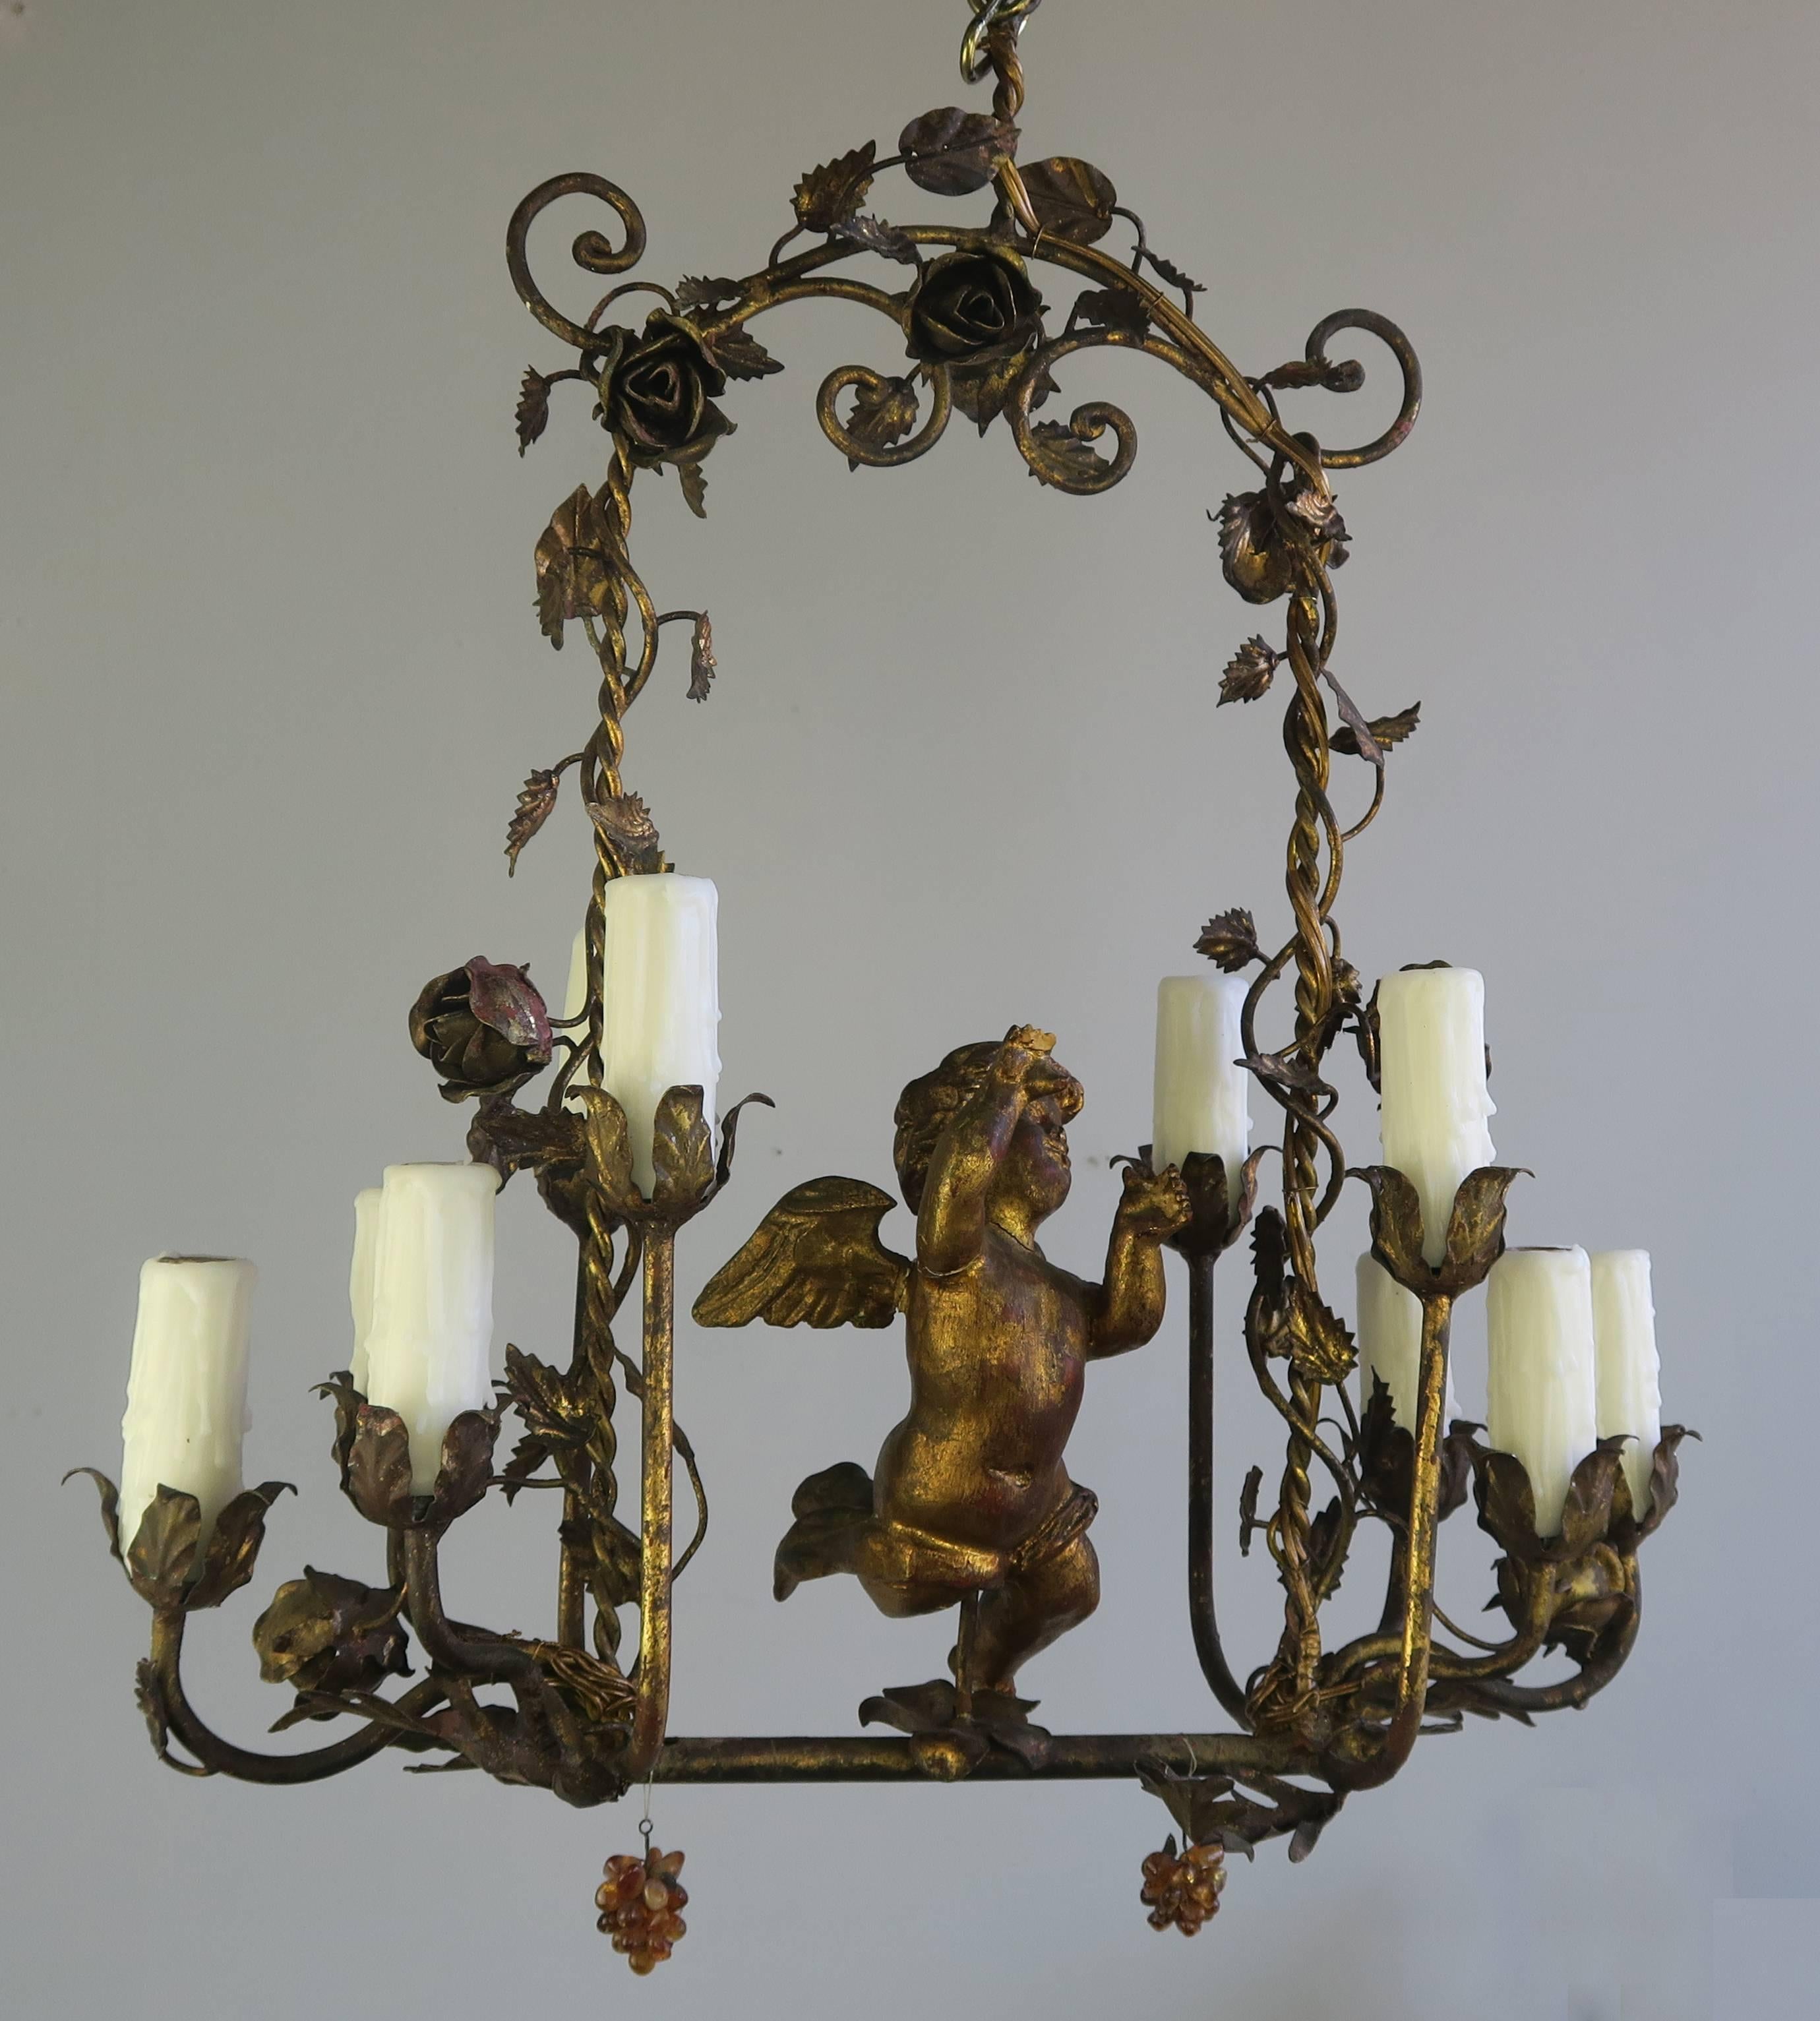 Unique Italian giltwood and metal cherub ten light chandelier. Fine gilt metal flowers and leaves make a beautiful arch over a giltwood cherub. The fixture is newly wired with drip wax candle covers. Includes chain and canopy.